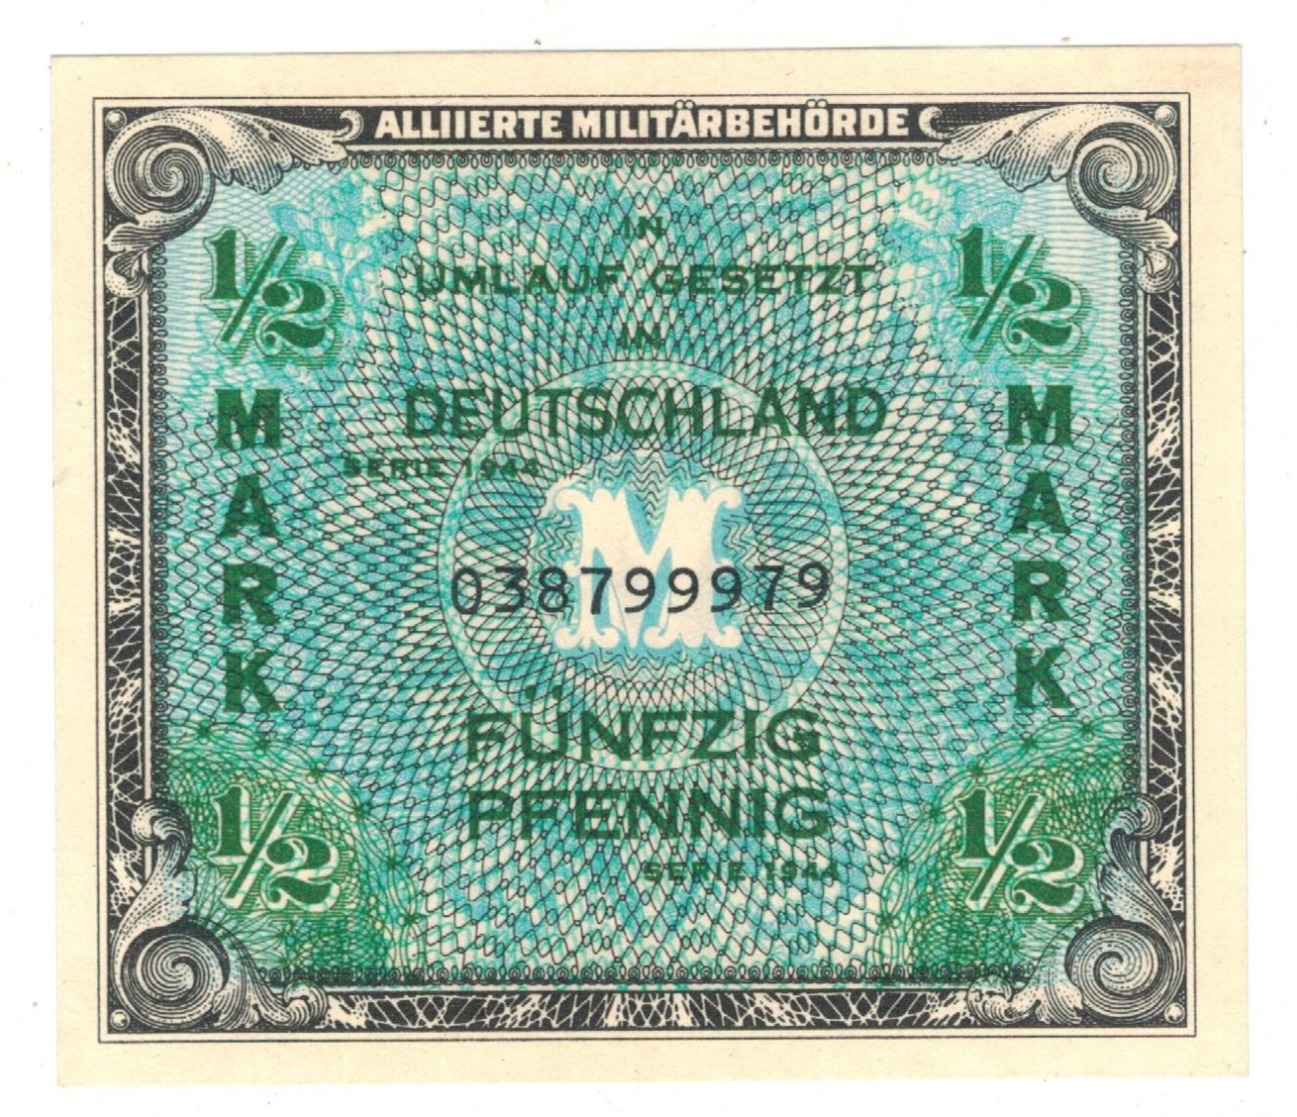 Germany Allied Occup. 1/2 Mk. 1944. P-191a. UNC. - 1/2 Mark